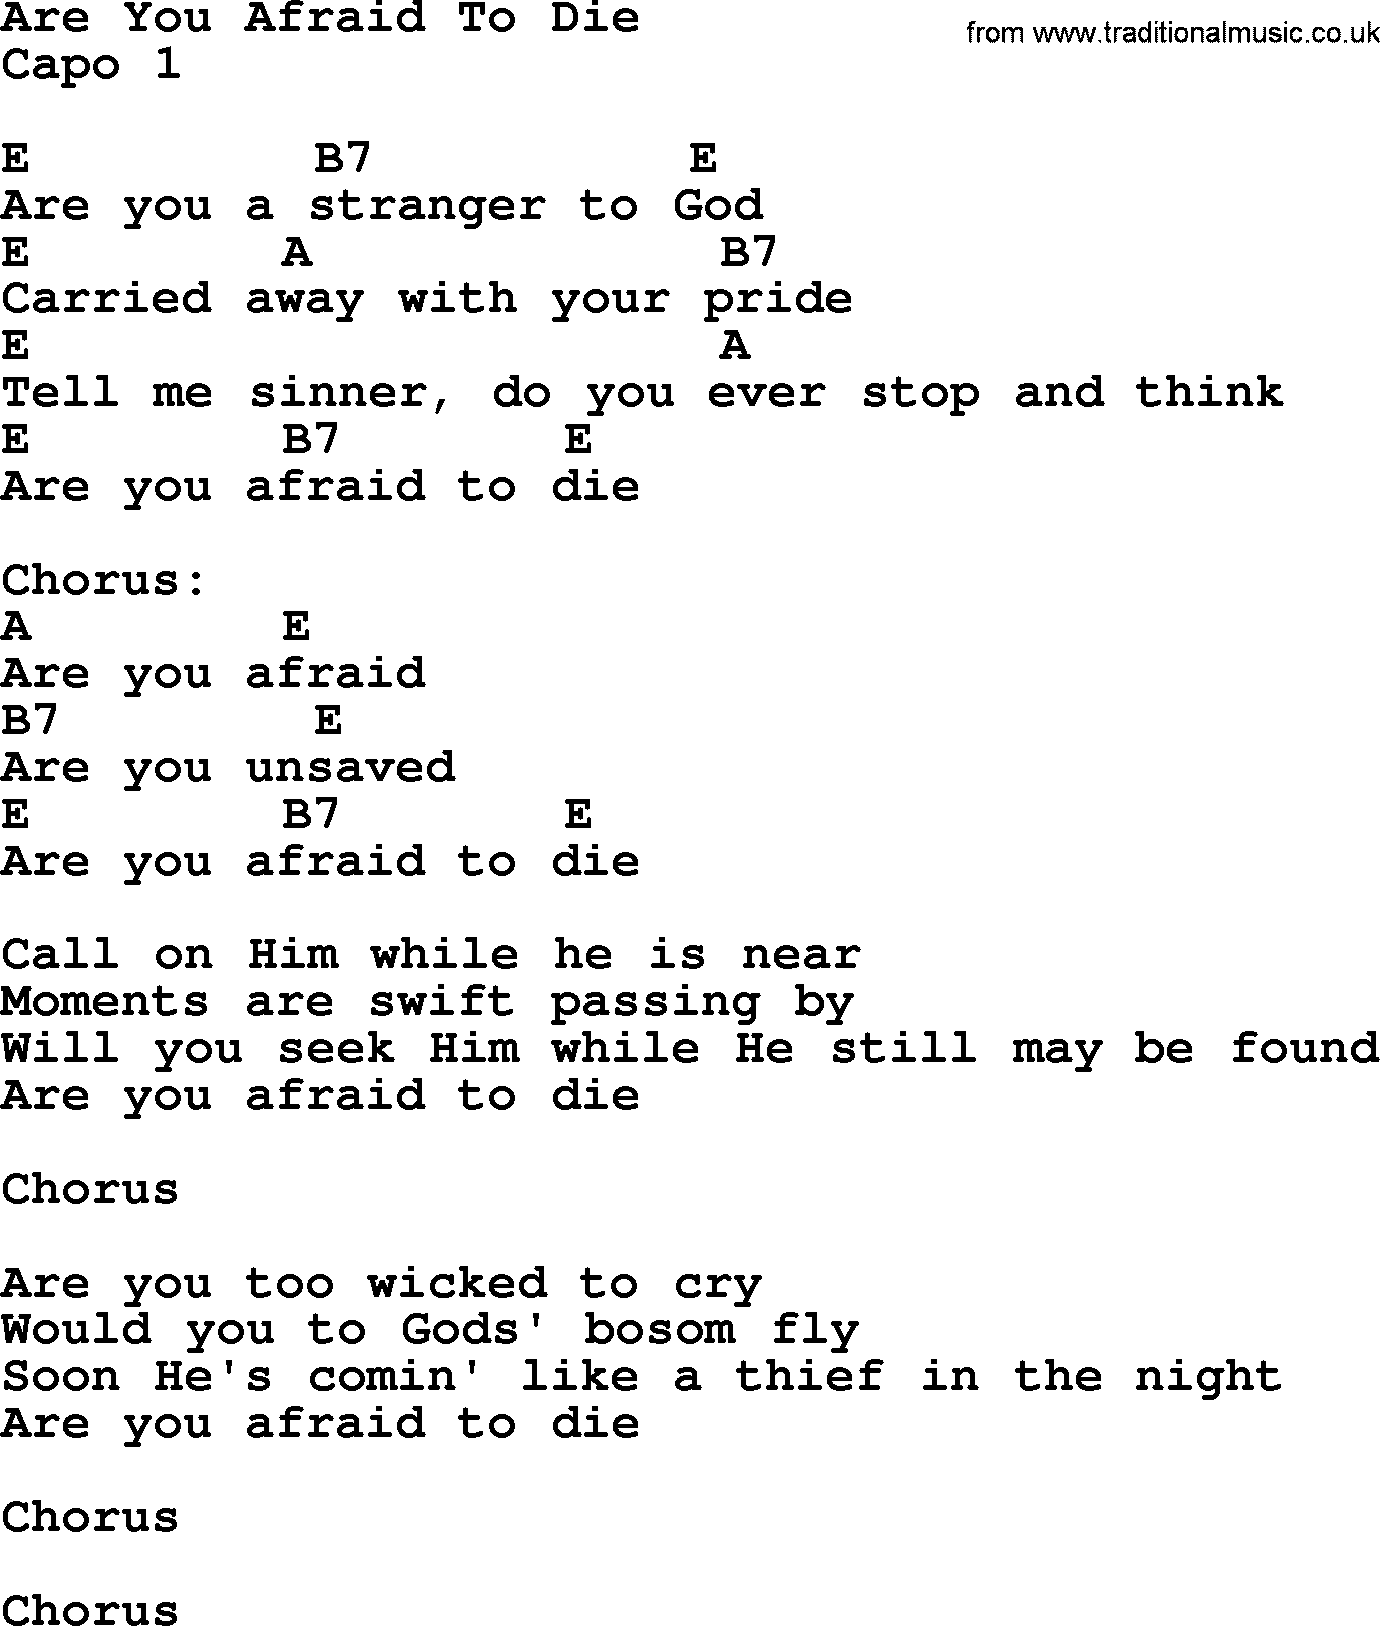 Bluegrass song: Are You Afraid To Die, lyrics and chords